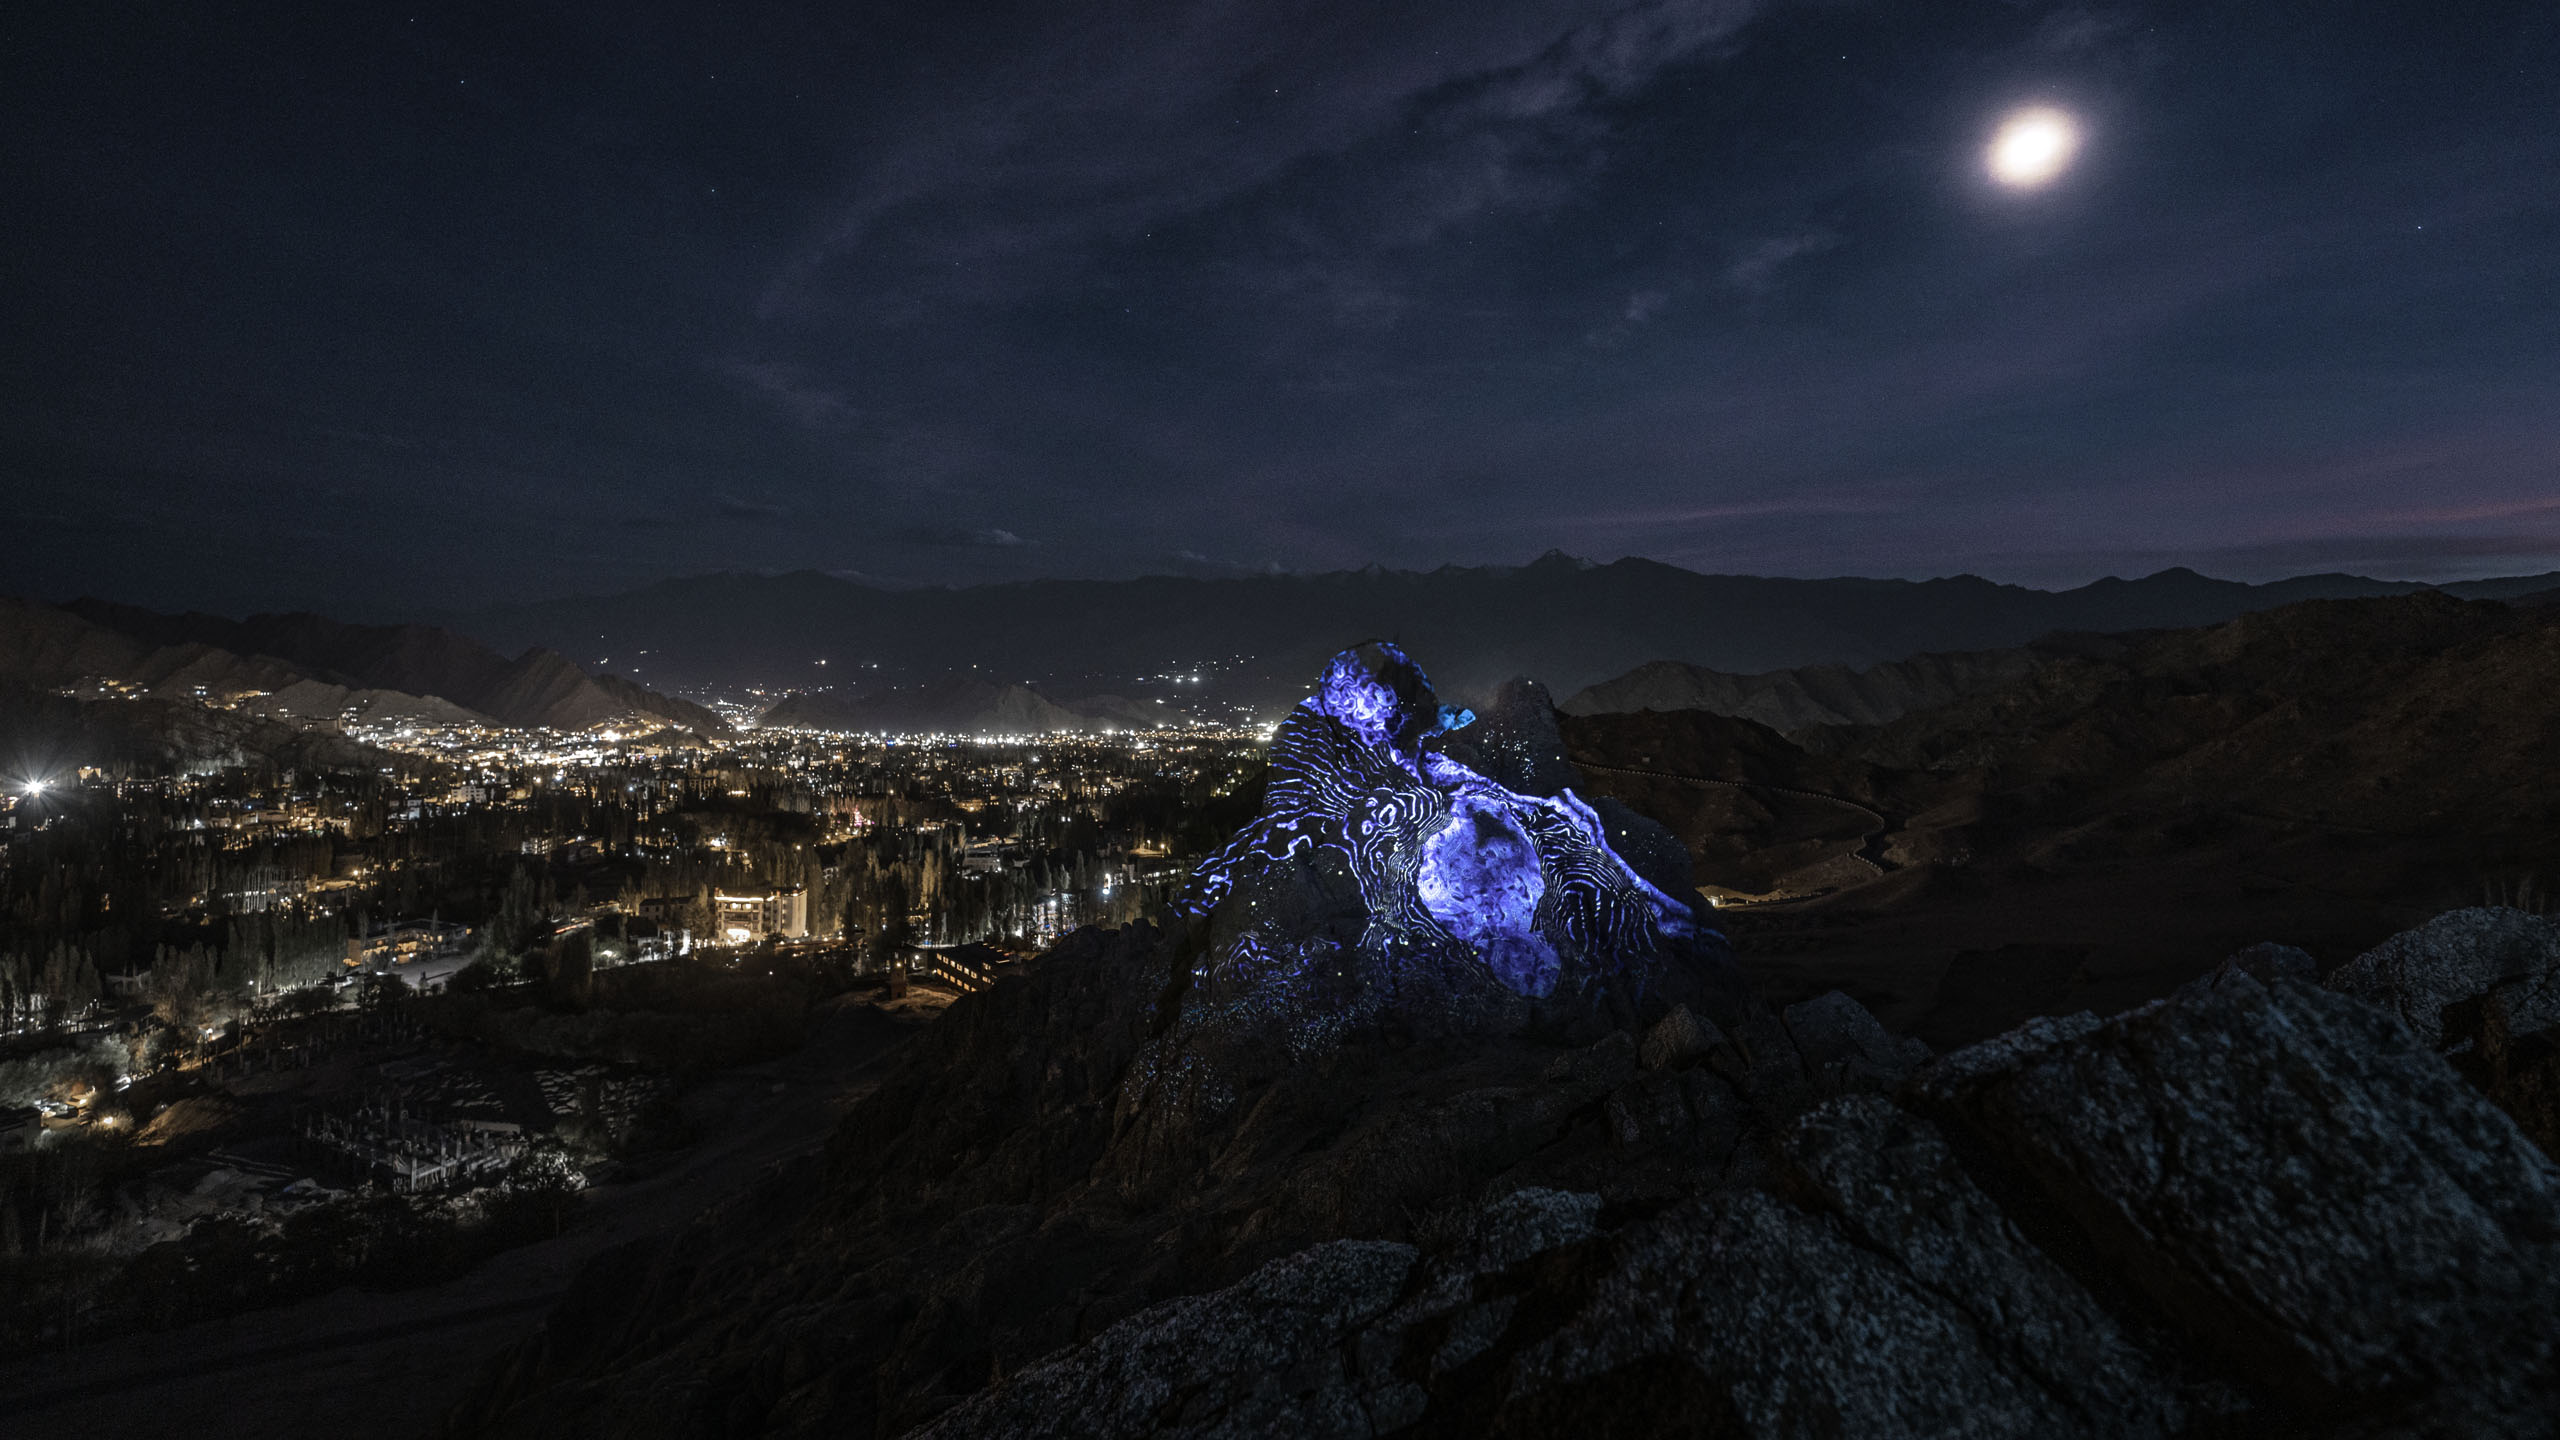 Land art projection mapping artwork on a rock with blue visuals  in a nightly mountain scenery